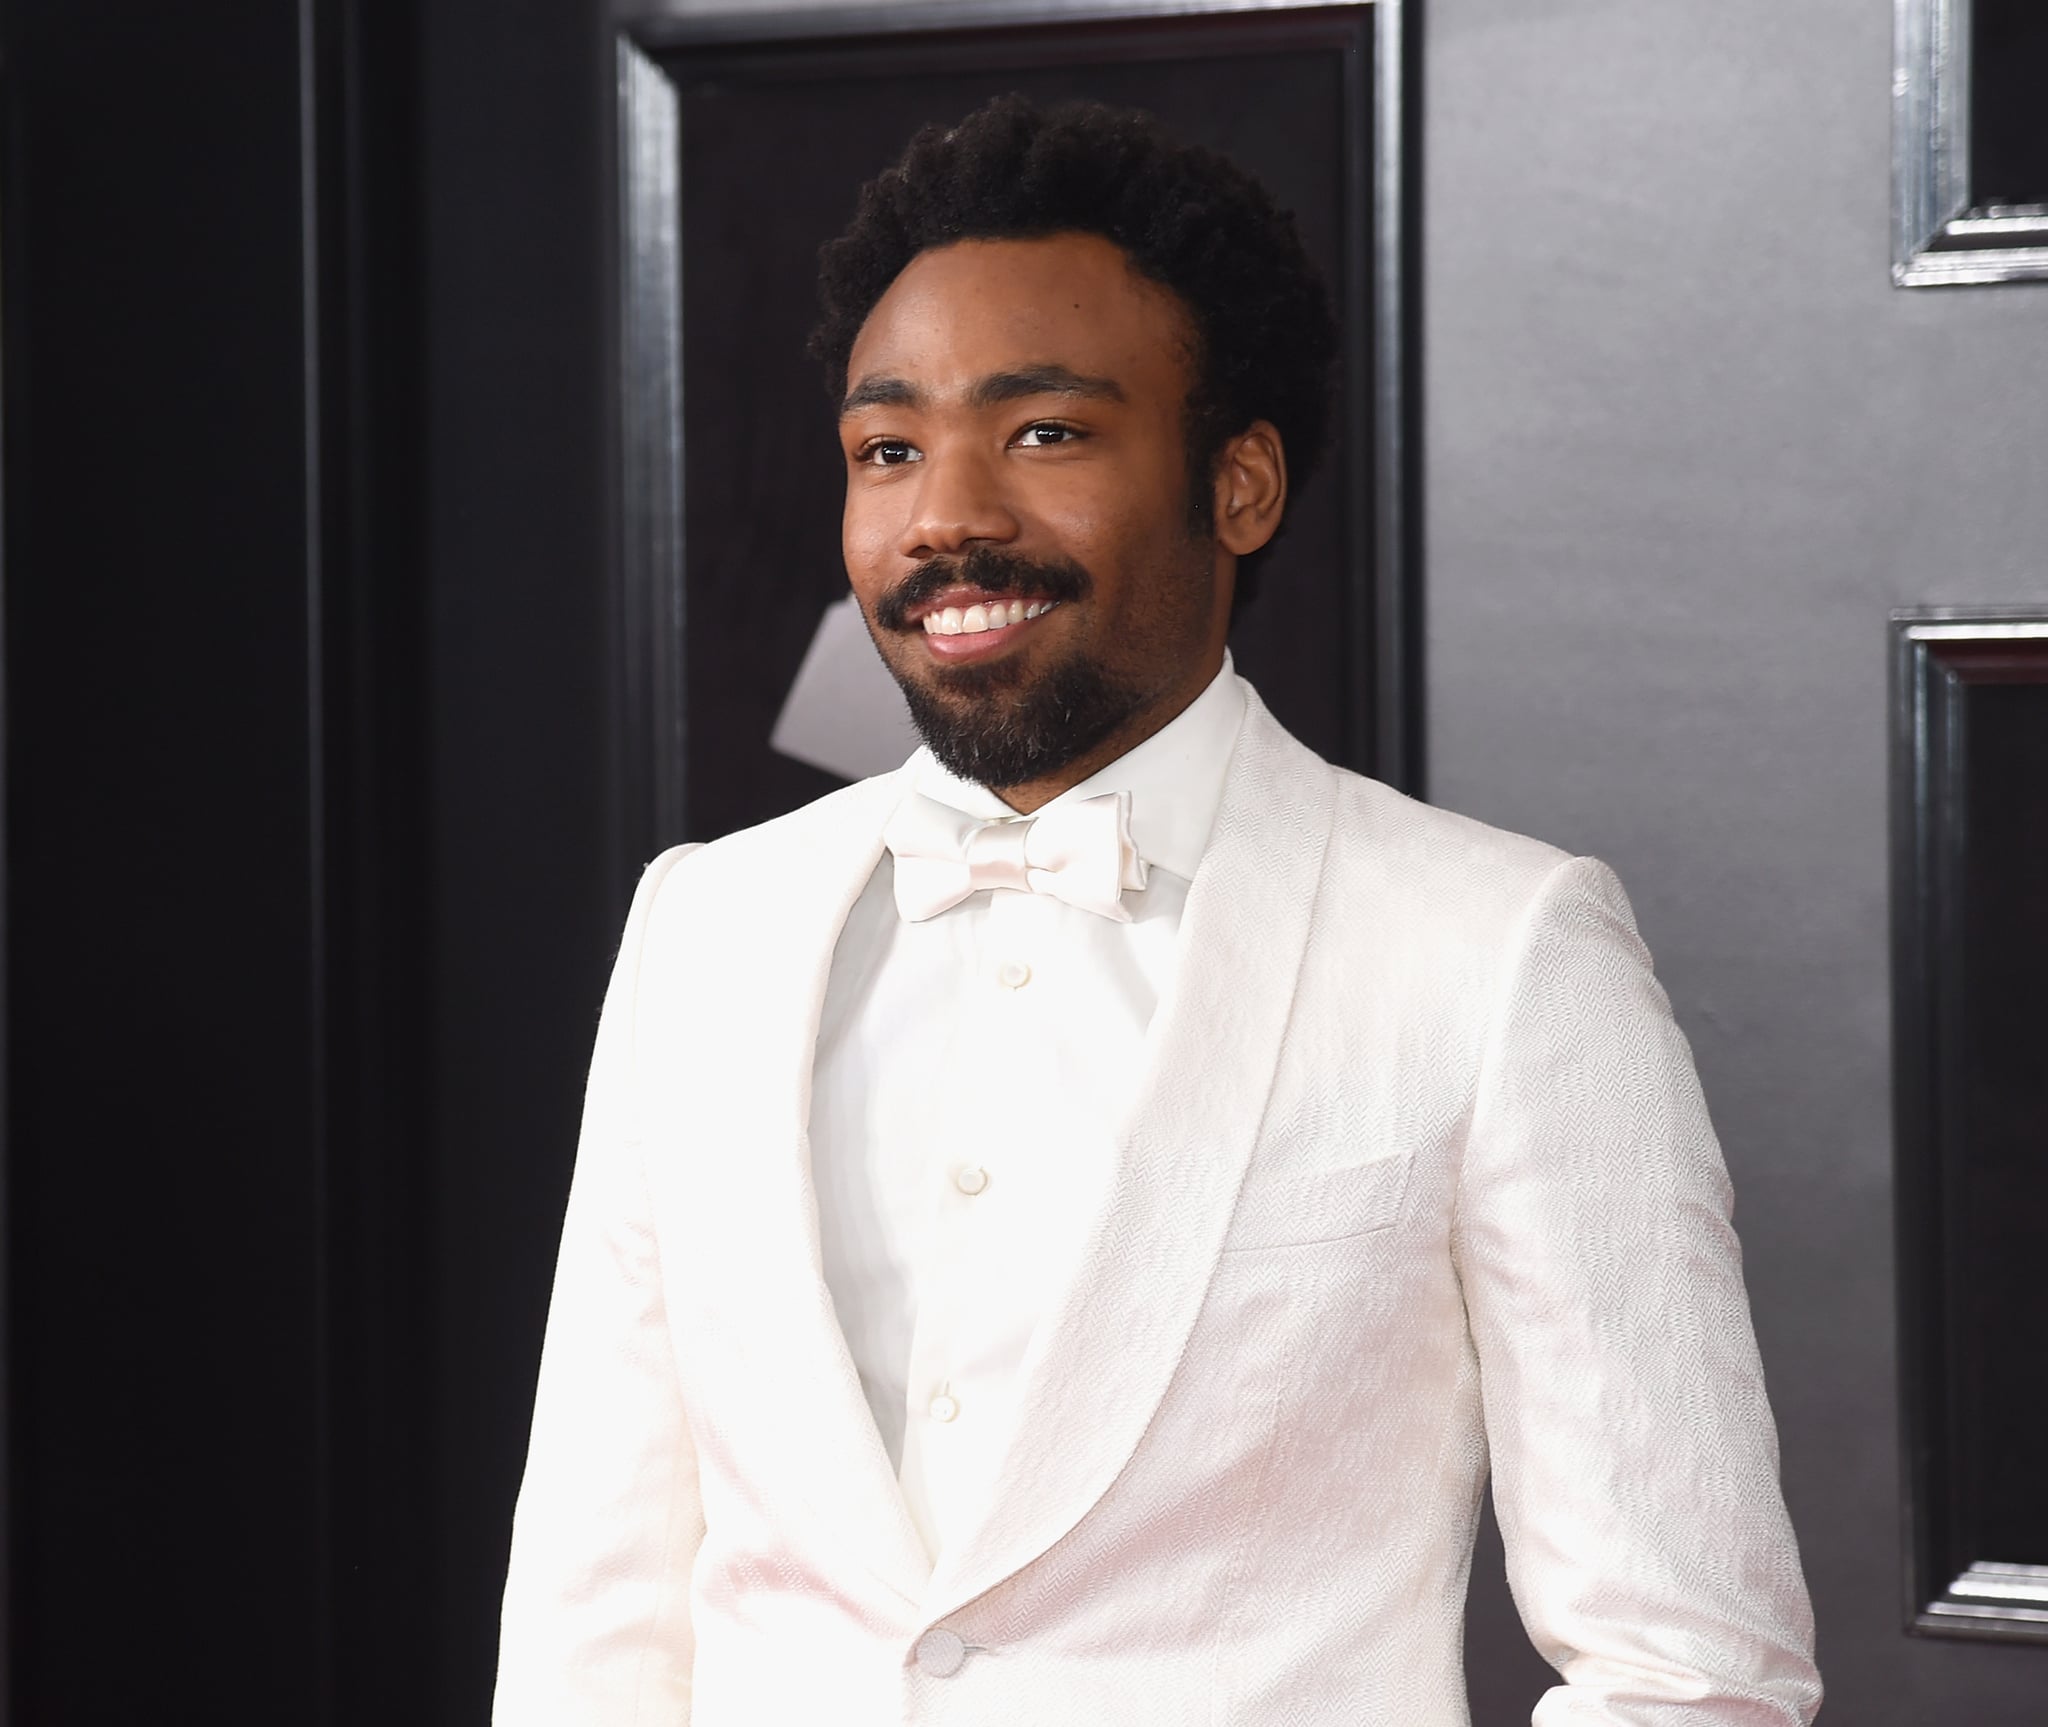 NEW YORK, NY - JANUARY 28:  Recording artist Donald Glover aka Childish Gambino attends the 60th Annual GRAMMY Awards at Madison Square Garden on January 28, 2018 in New York City.  (Photo by Jamie McCarthy/Getty Images)